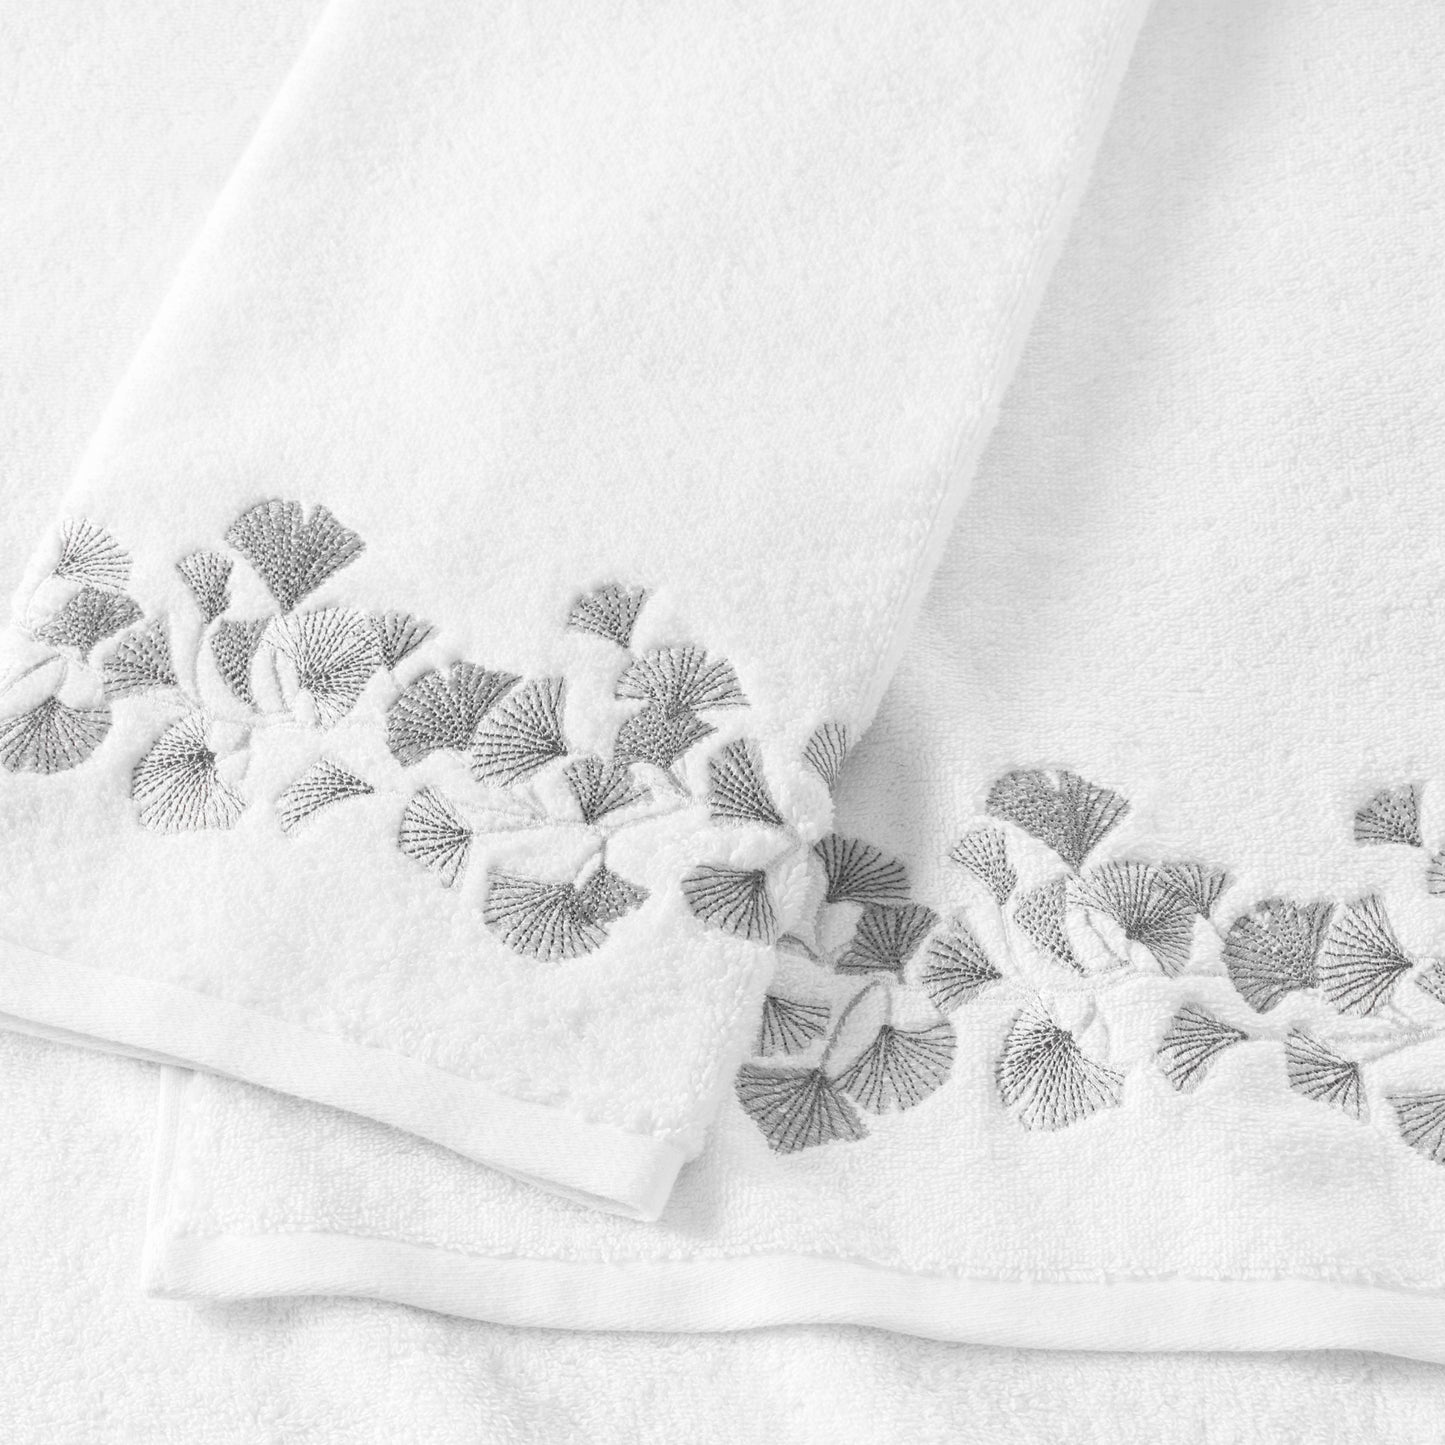 Michael Aram Gingko Embroidered Guest Towel 2pc Set